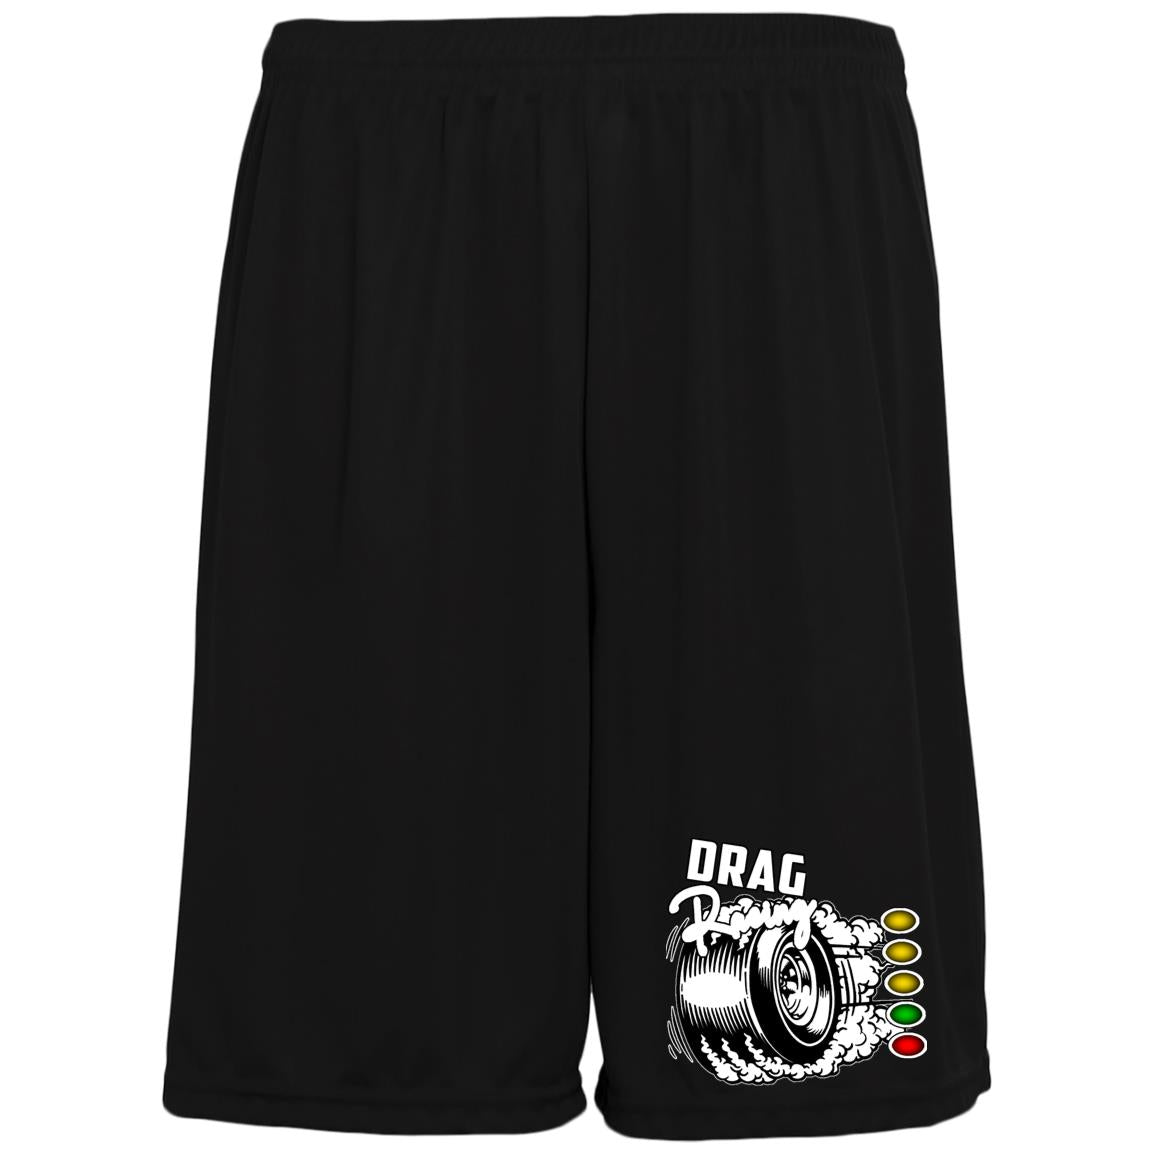 Drag Racing Moisture-Wicking Pocketed 9 inch Inseam Training Shorts